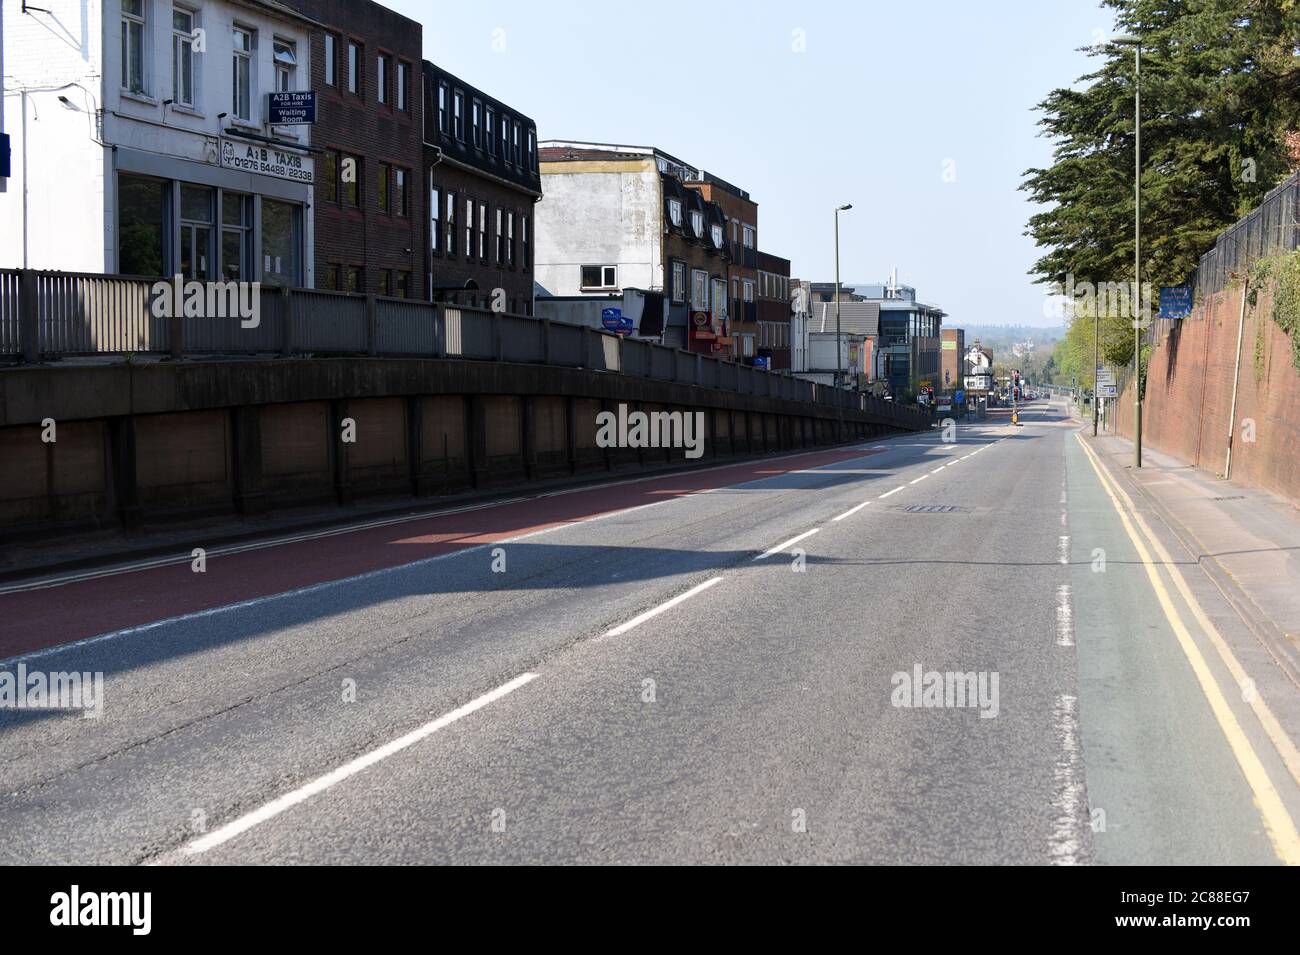 Camberley, Surrey, UK - 10 April 2020: Empty roads during the first COVID-19 lockdown of 2020 in Surrey, England Stock Photo